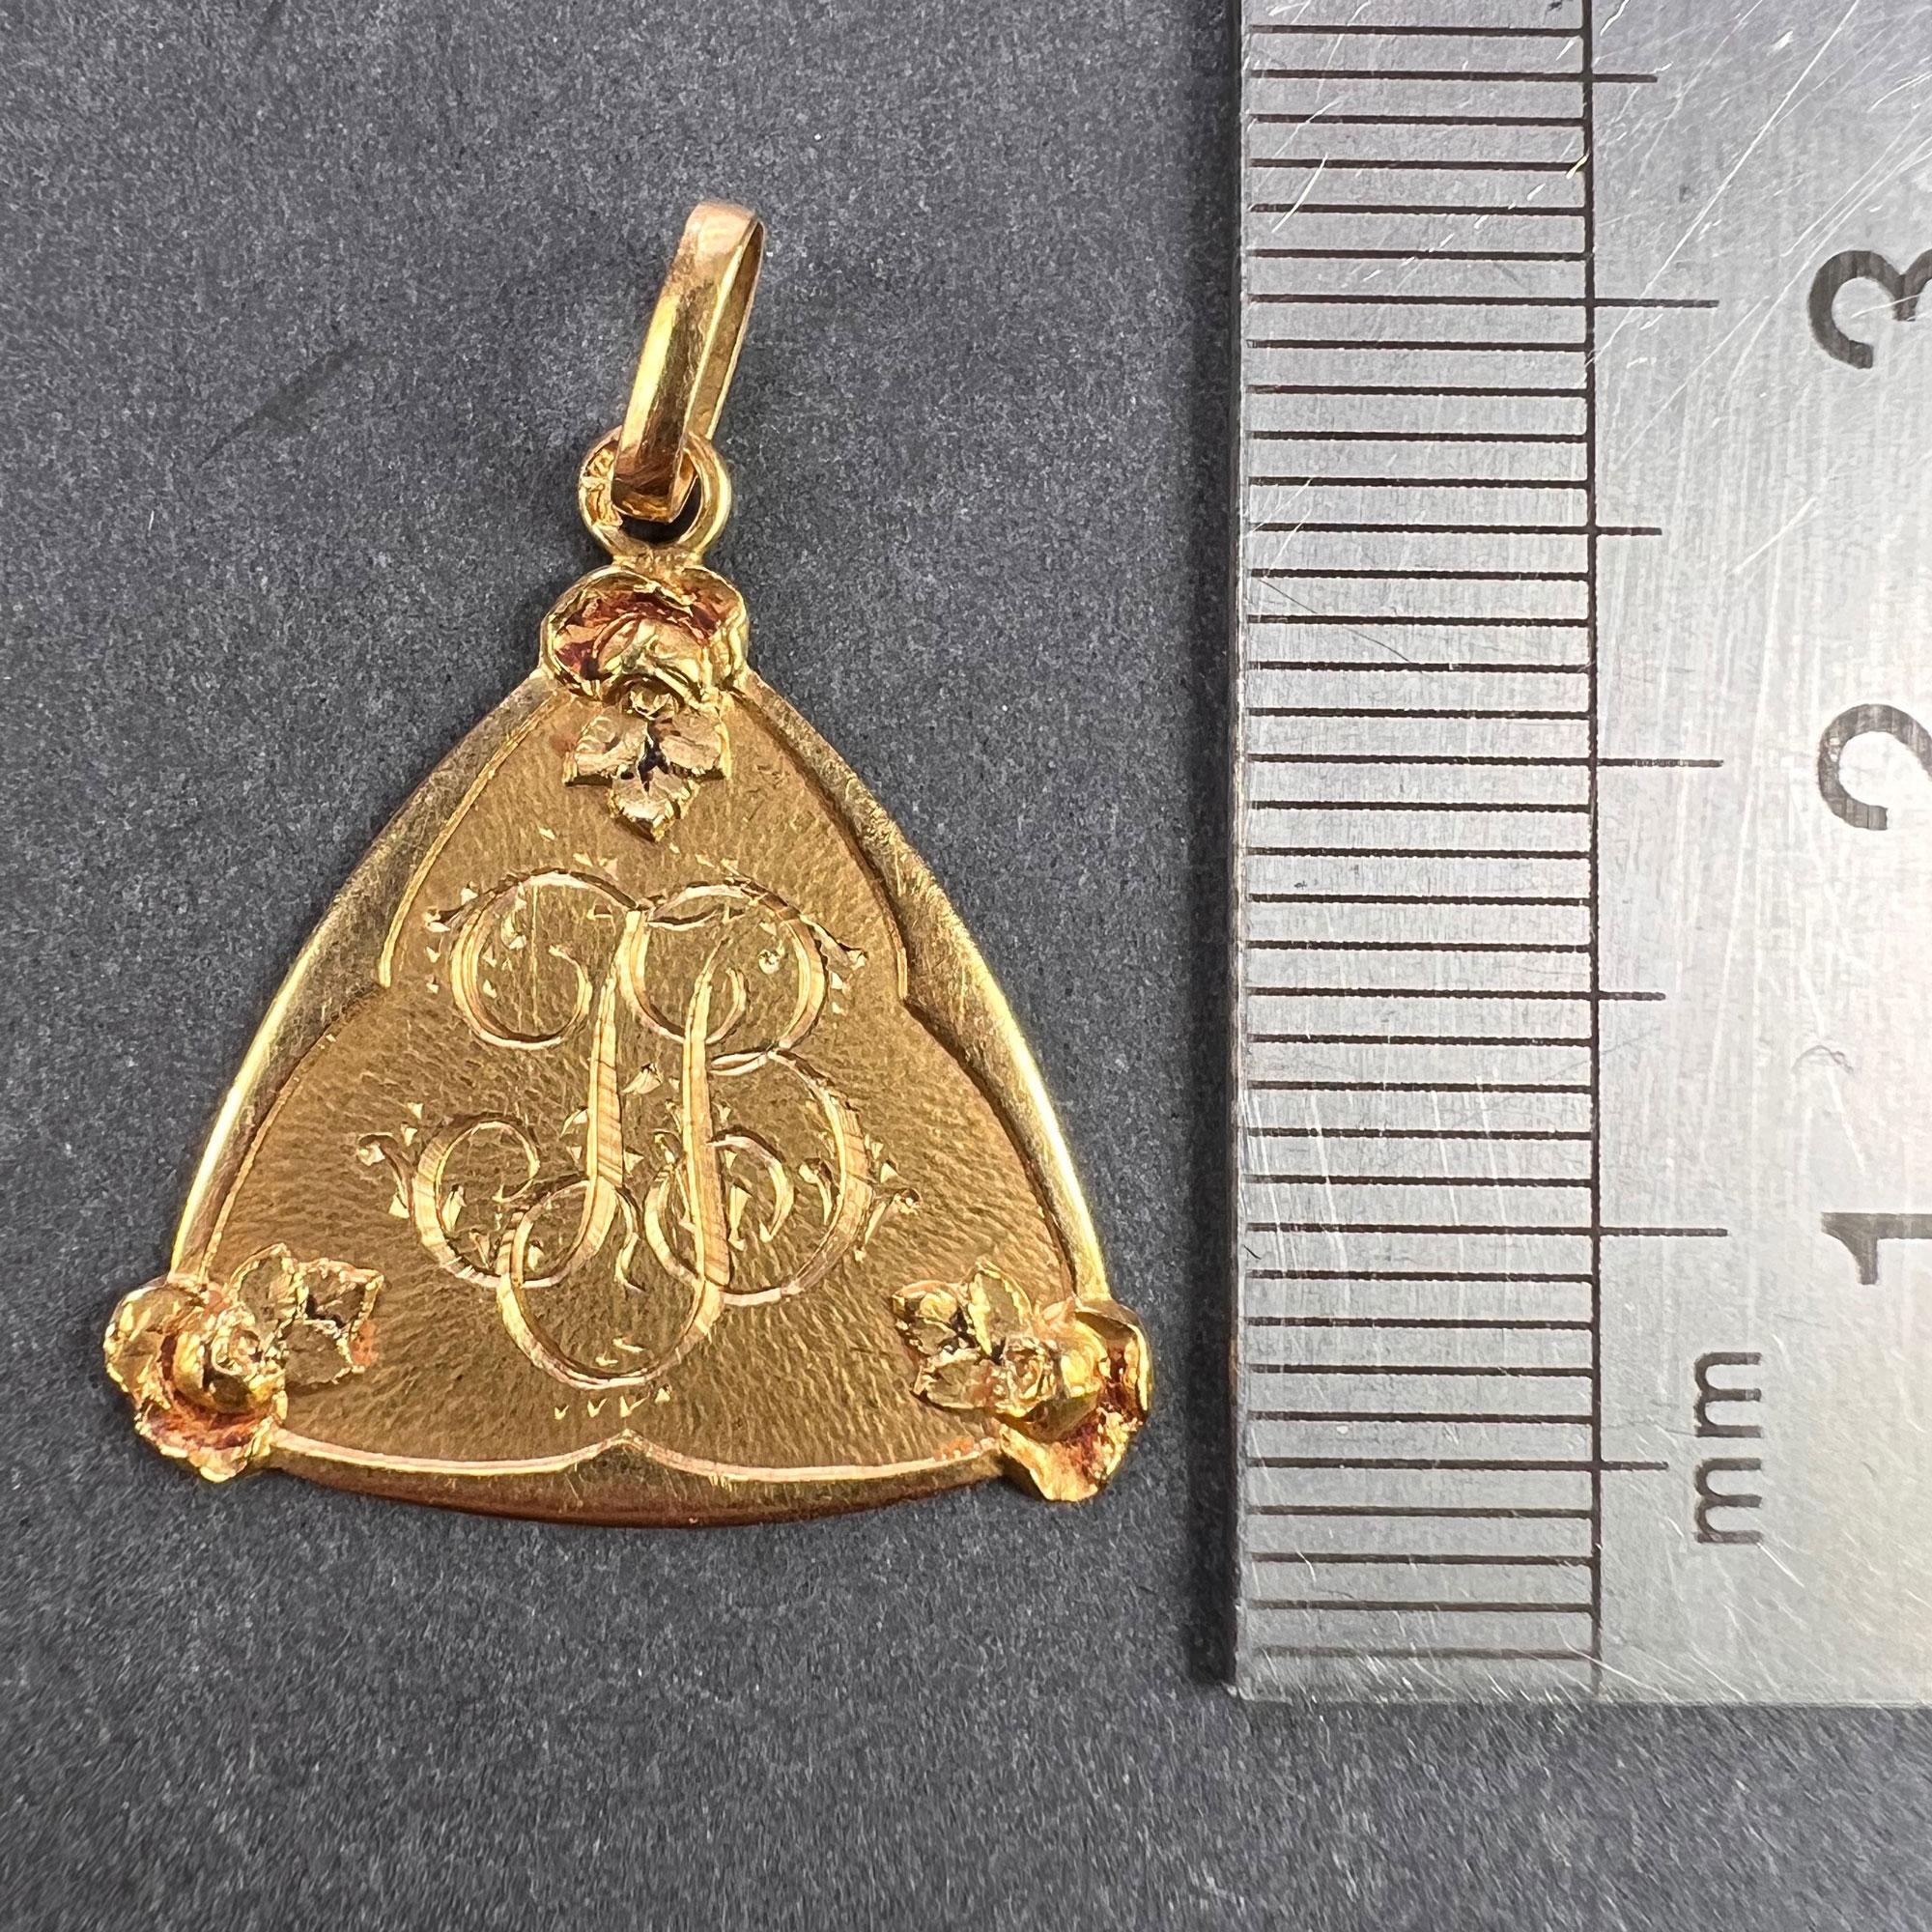 French 18K Yellow Gold JB Initials Monogram Medal Pendant For Sale 2